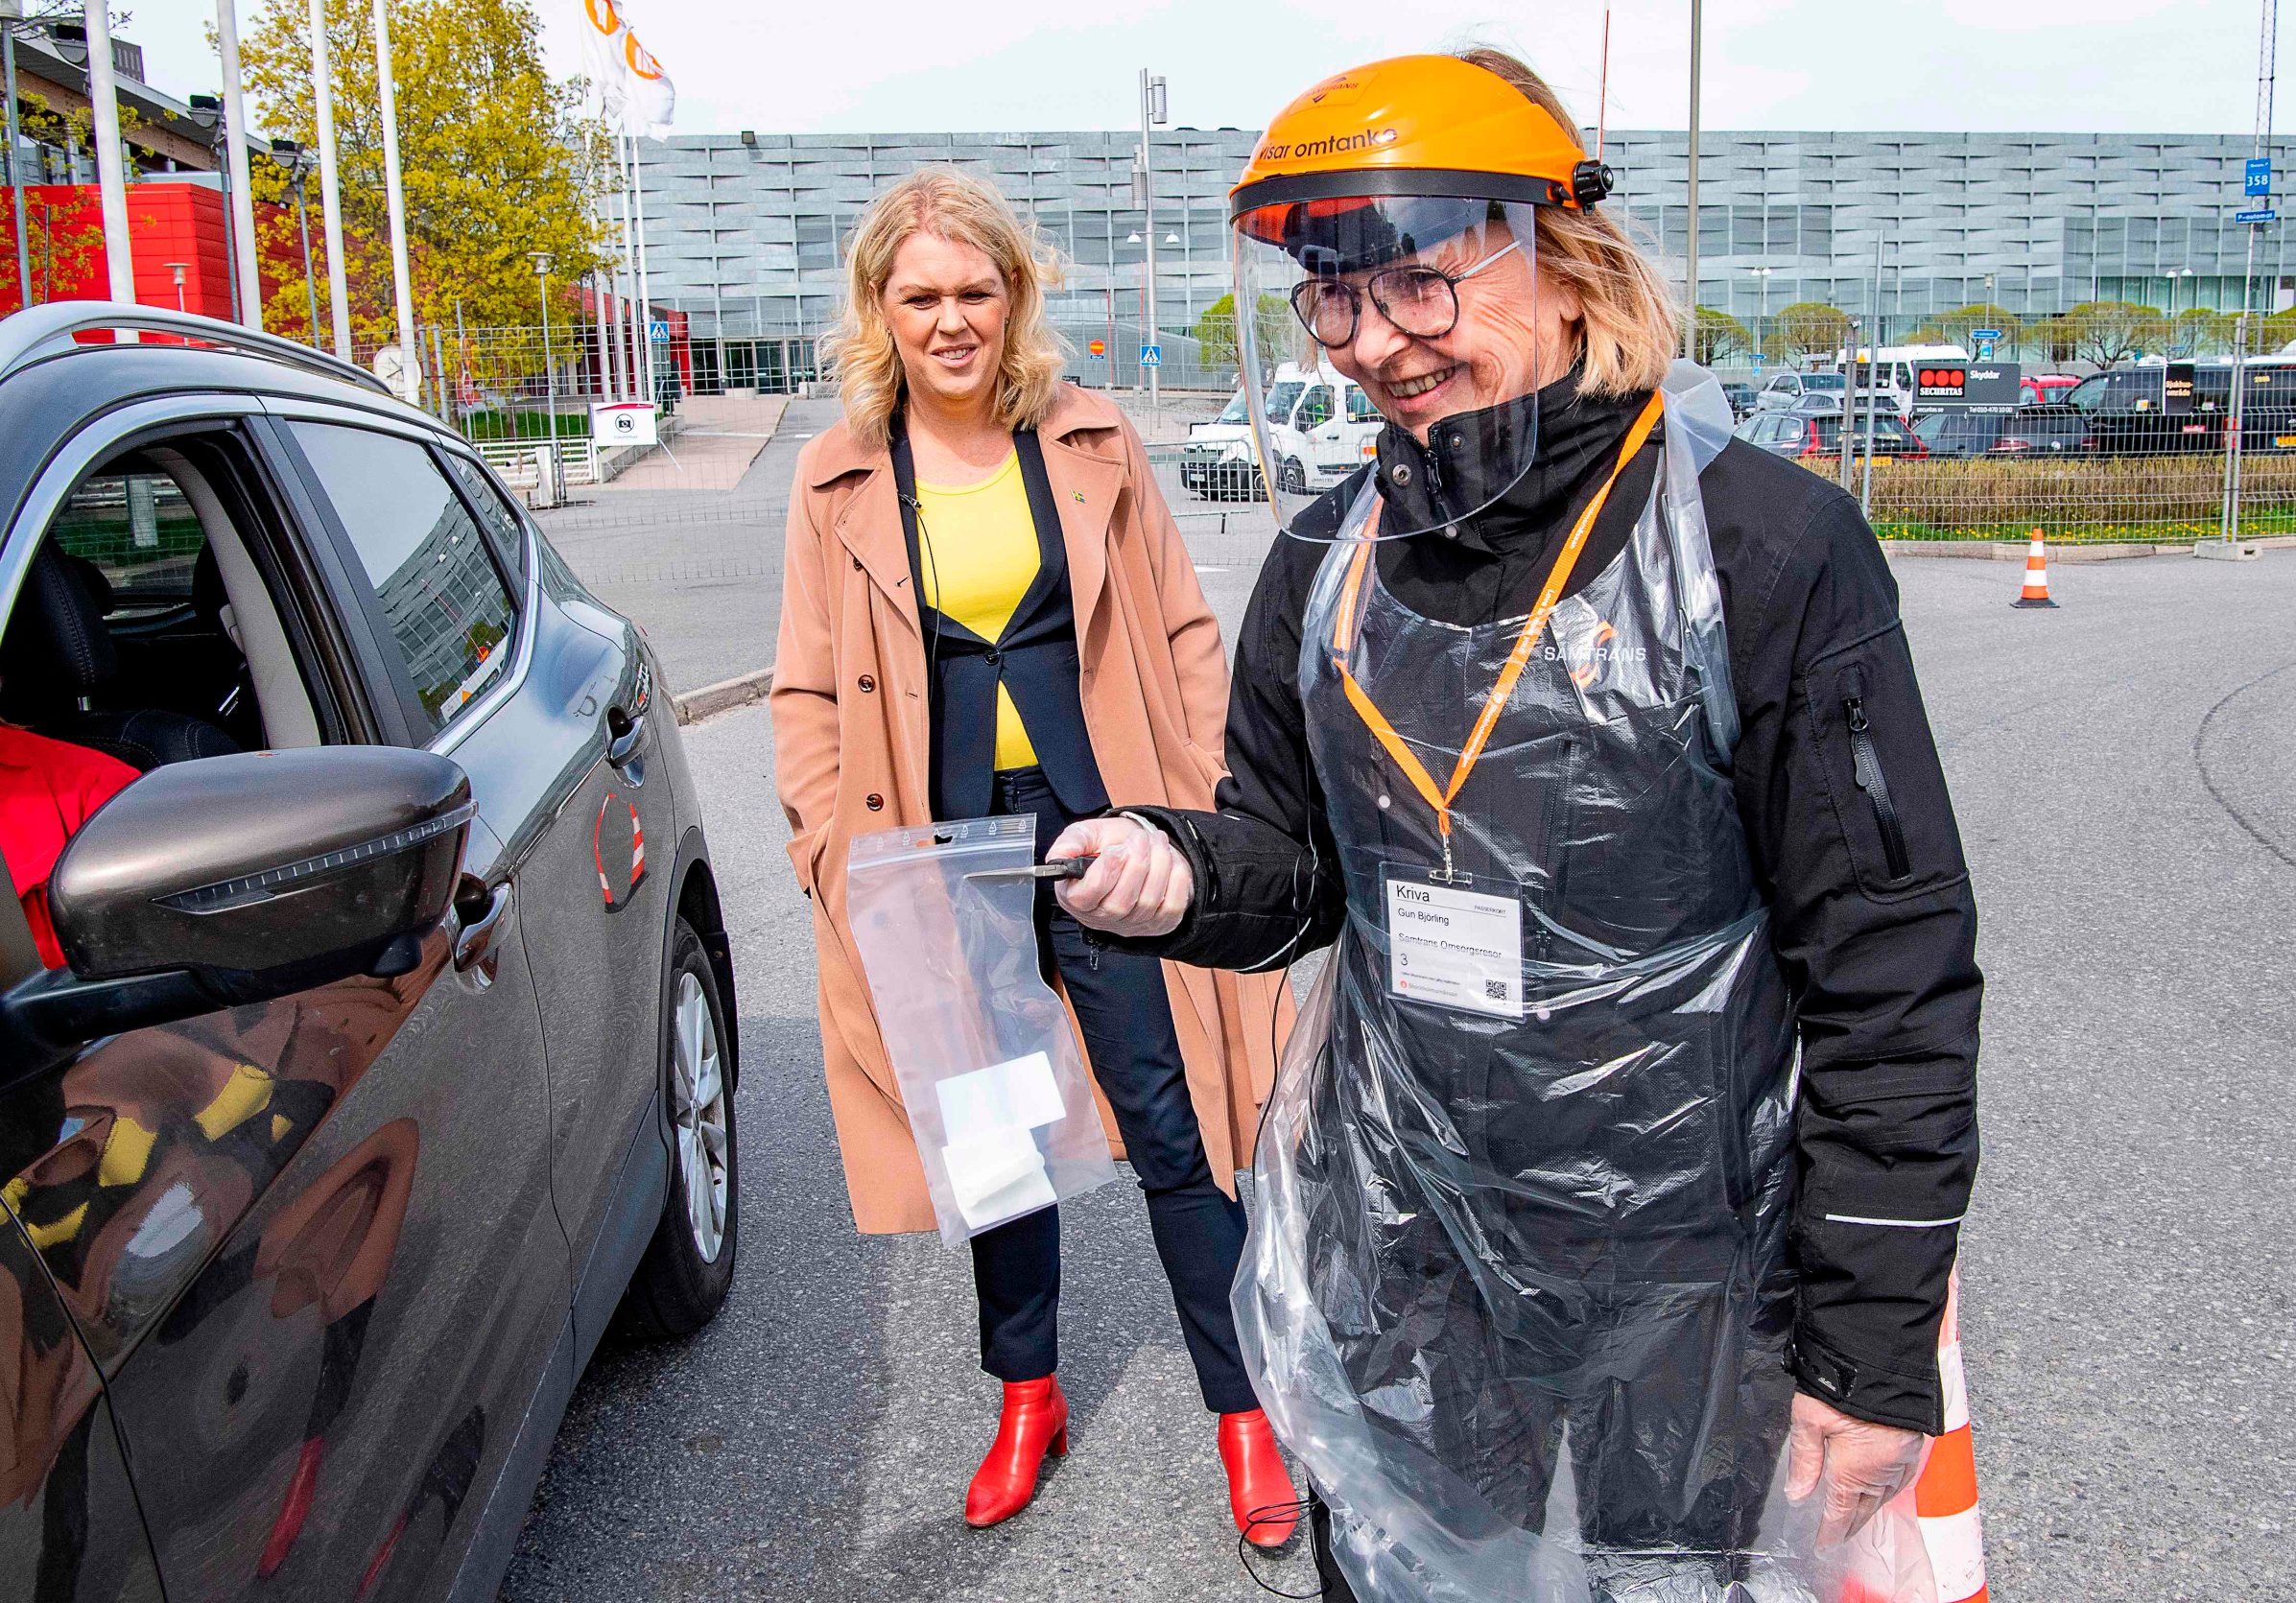 Sweden's Minister for Health and Social Affairs Lena Hallengren (C) looks on as health worker Gun Bjorling (R) administers a Covid-19 test at a drive-in-test station in Alvsjo, Stockholm, Sweden, on May 6, 2020, amid the novel coronavirus pandemic. - Several mobile test stations, primarly for health care workers, are set up around Stockhom to fight the Covid-19 disease. (Photo by Jonas EKSTROMER / TT News Agency / AFP) / Sweden OUT